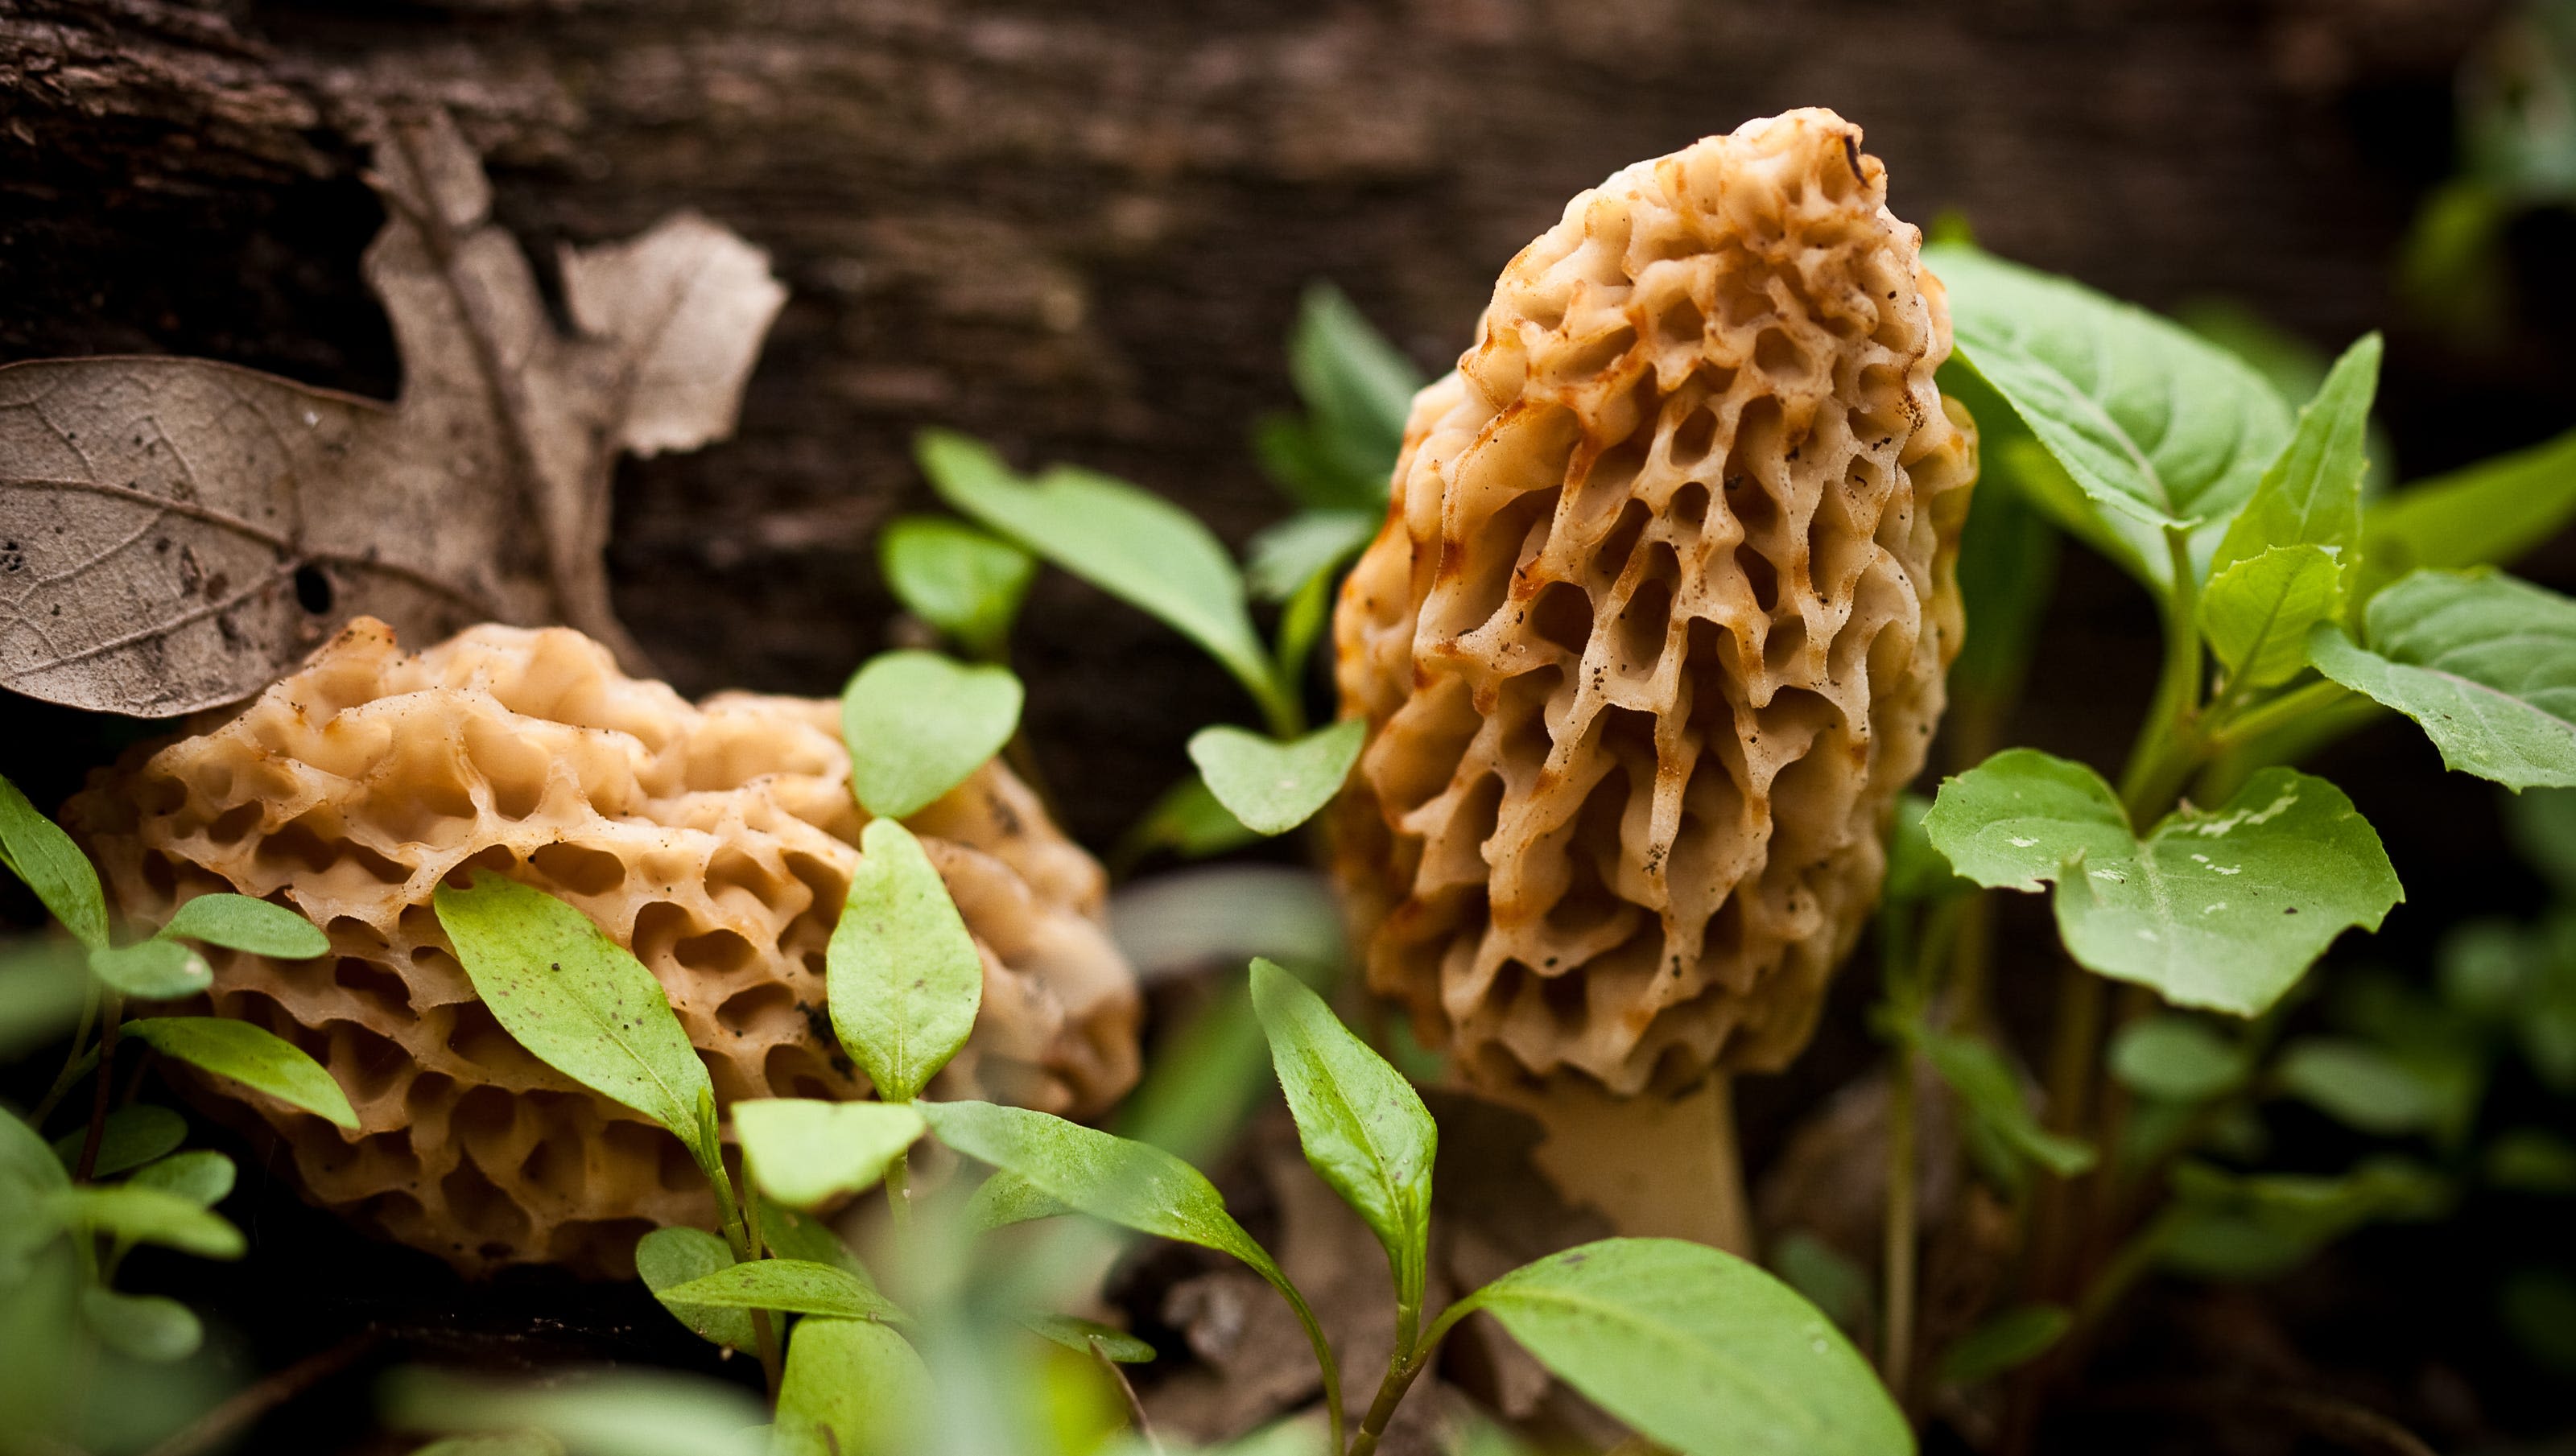 Morel mushroom season is underway in New York. Where to find, how to store, other tips